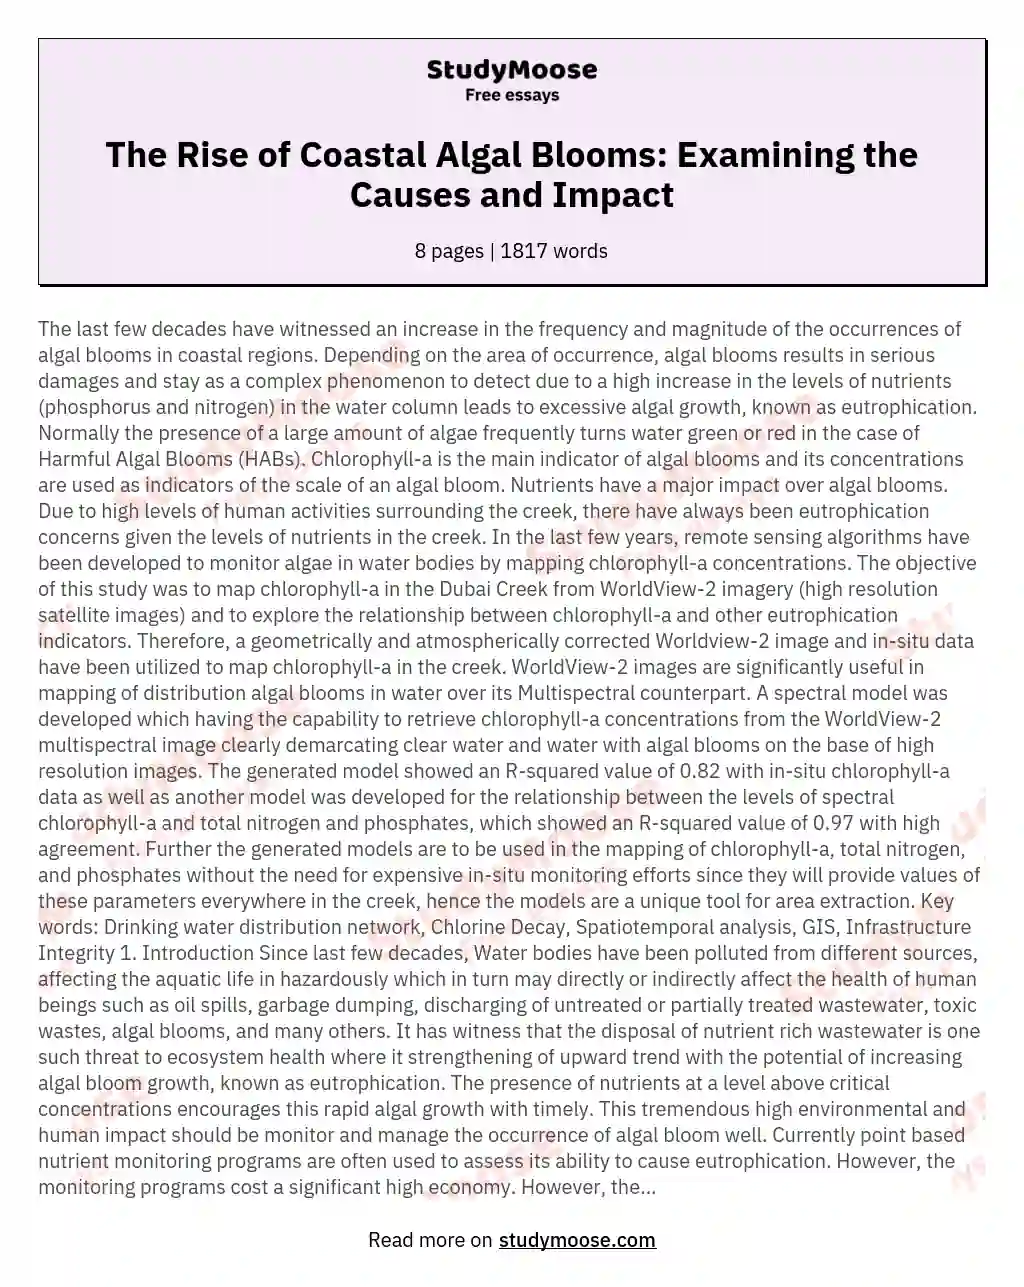 The Rise of Coastal Algal Blooms: Examining the Causes and Impact essay